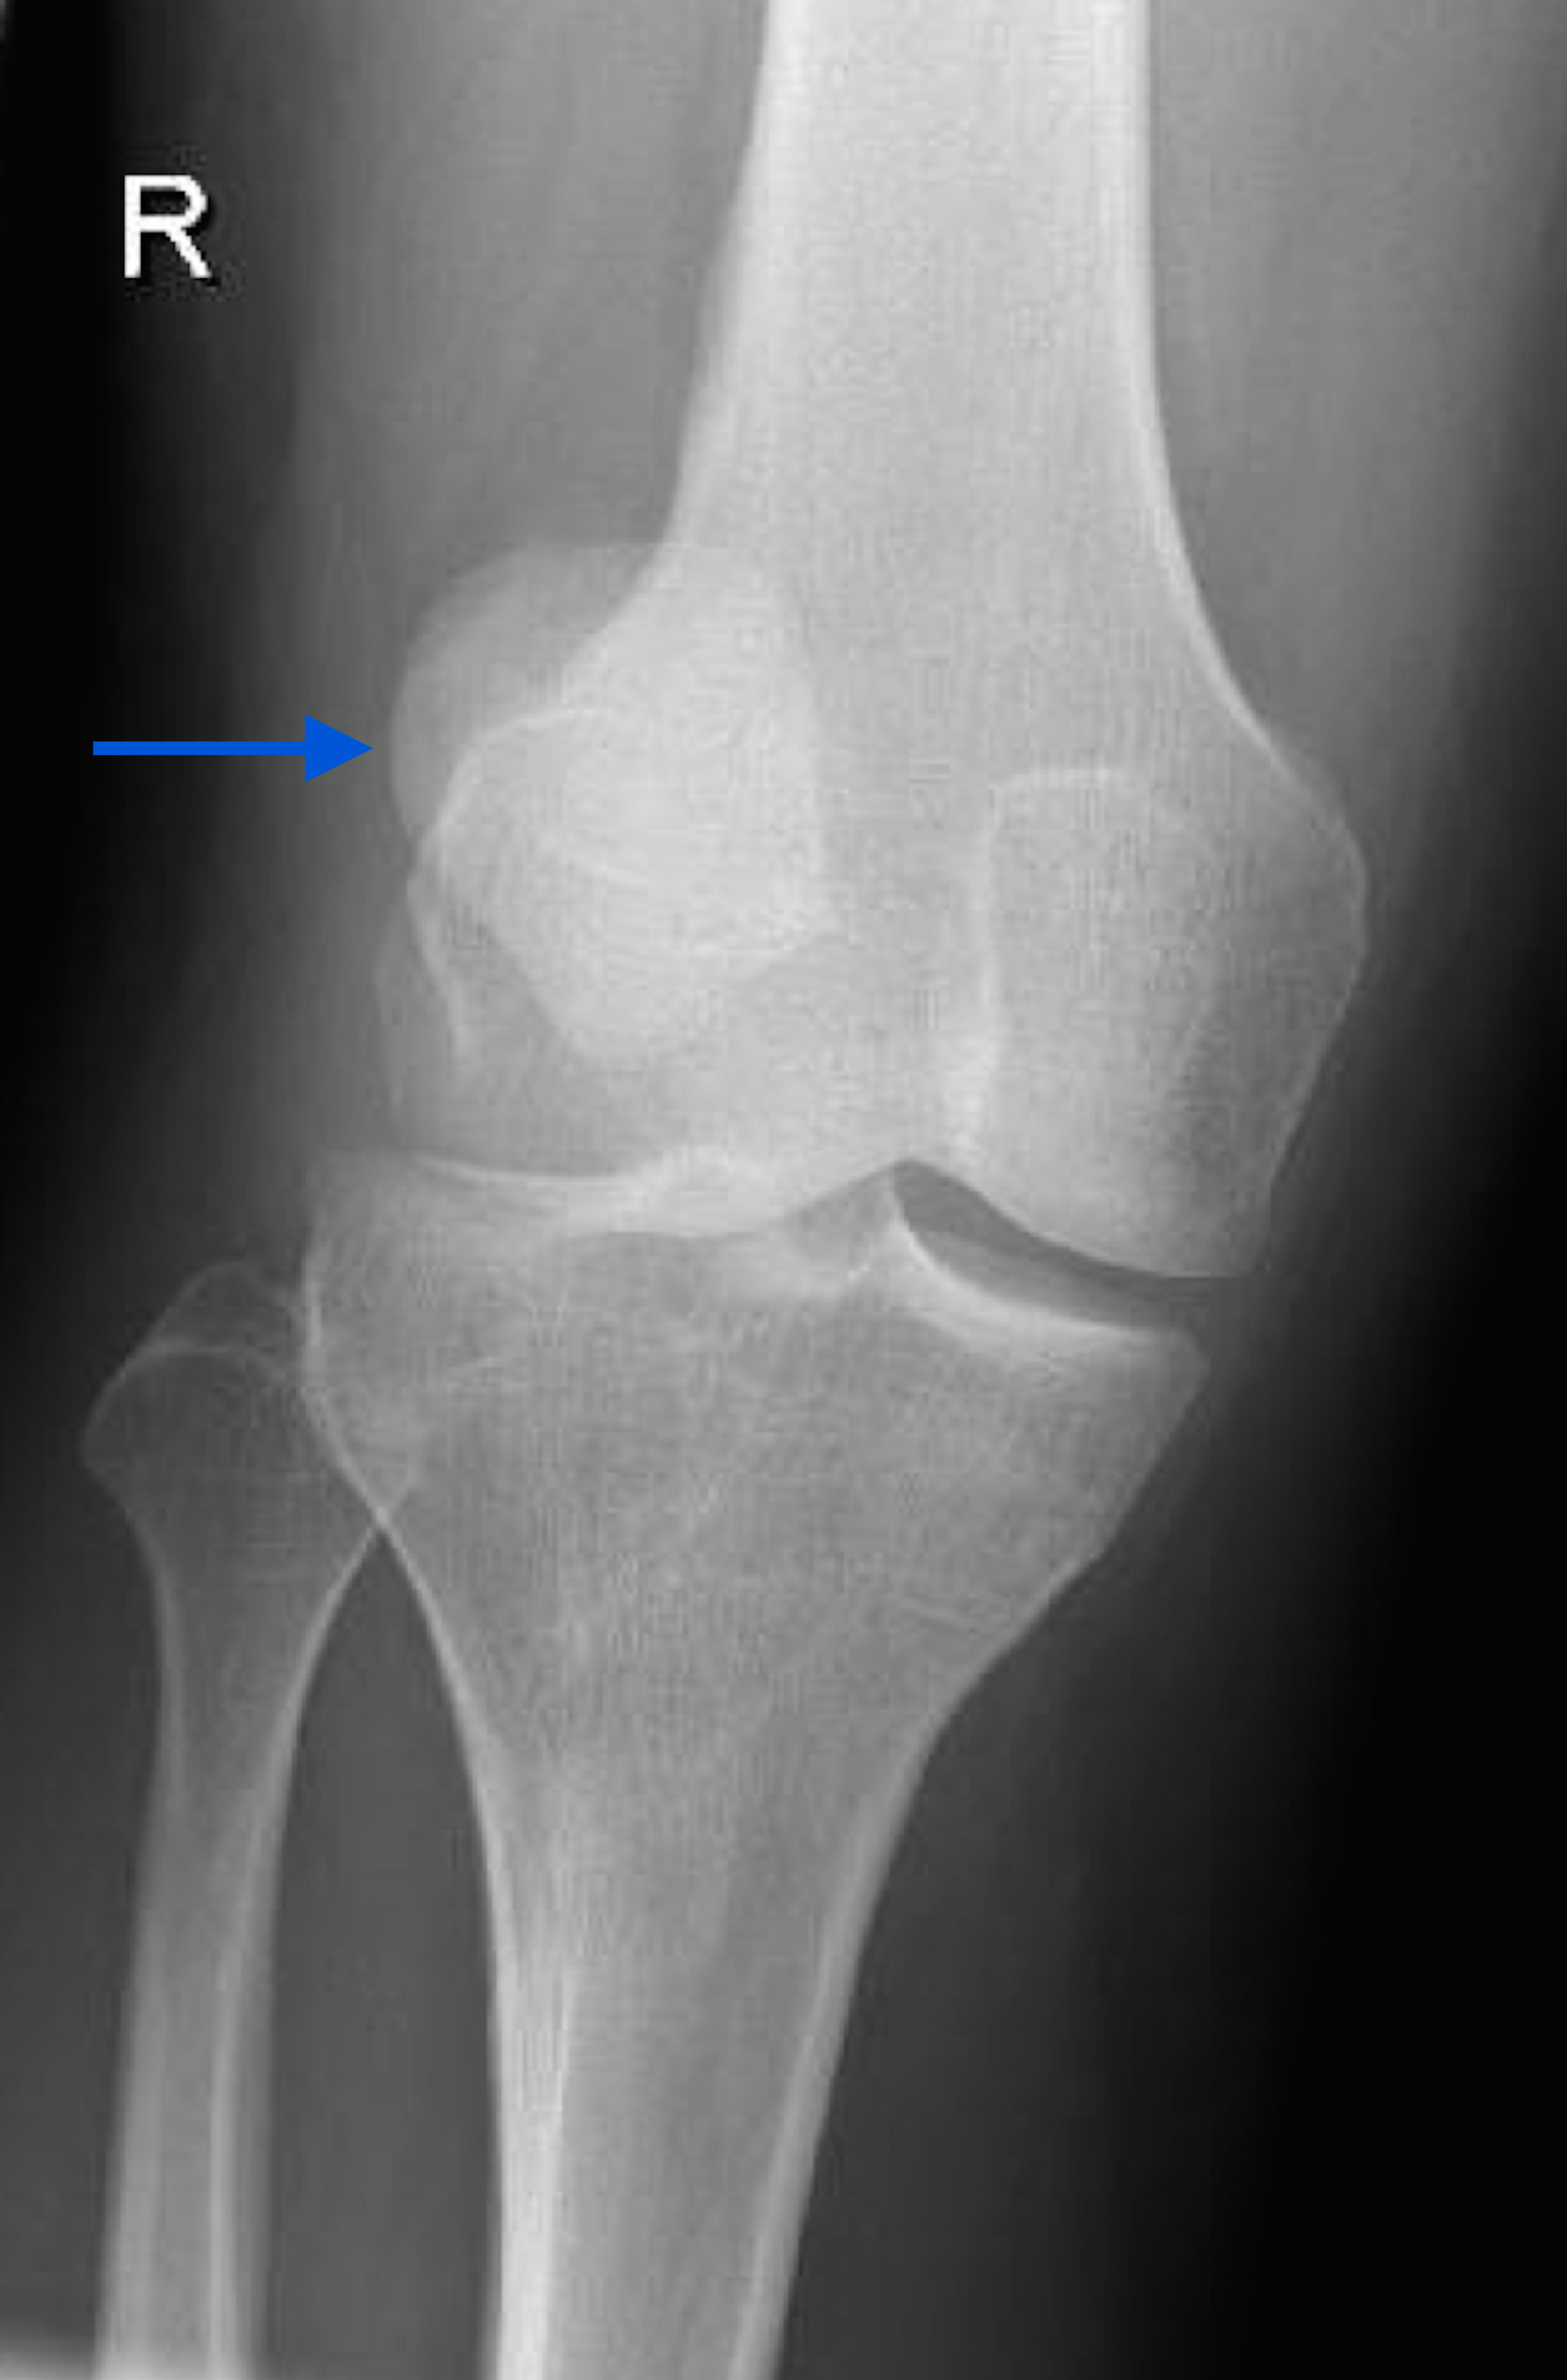 x ray of dislocated knee